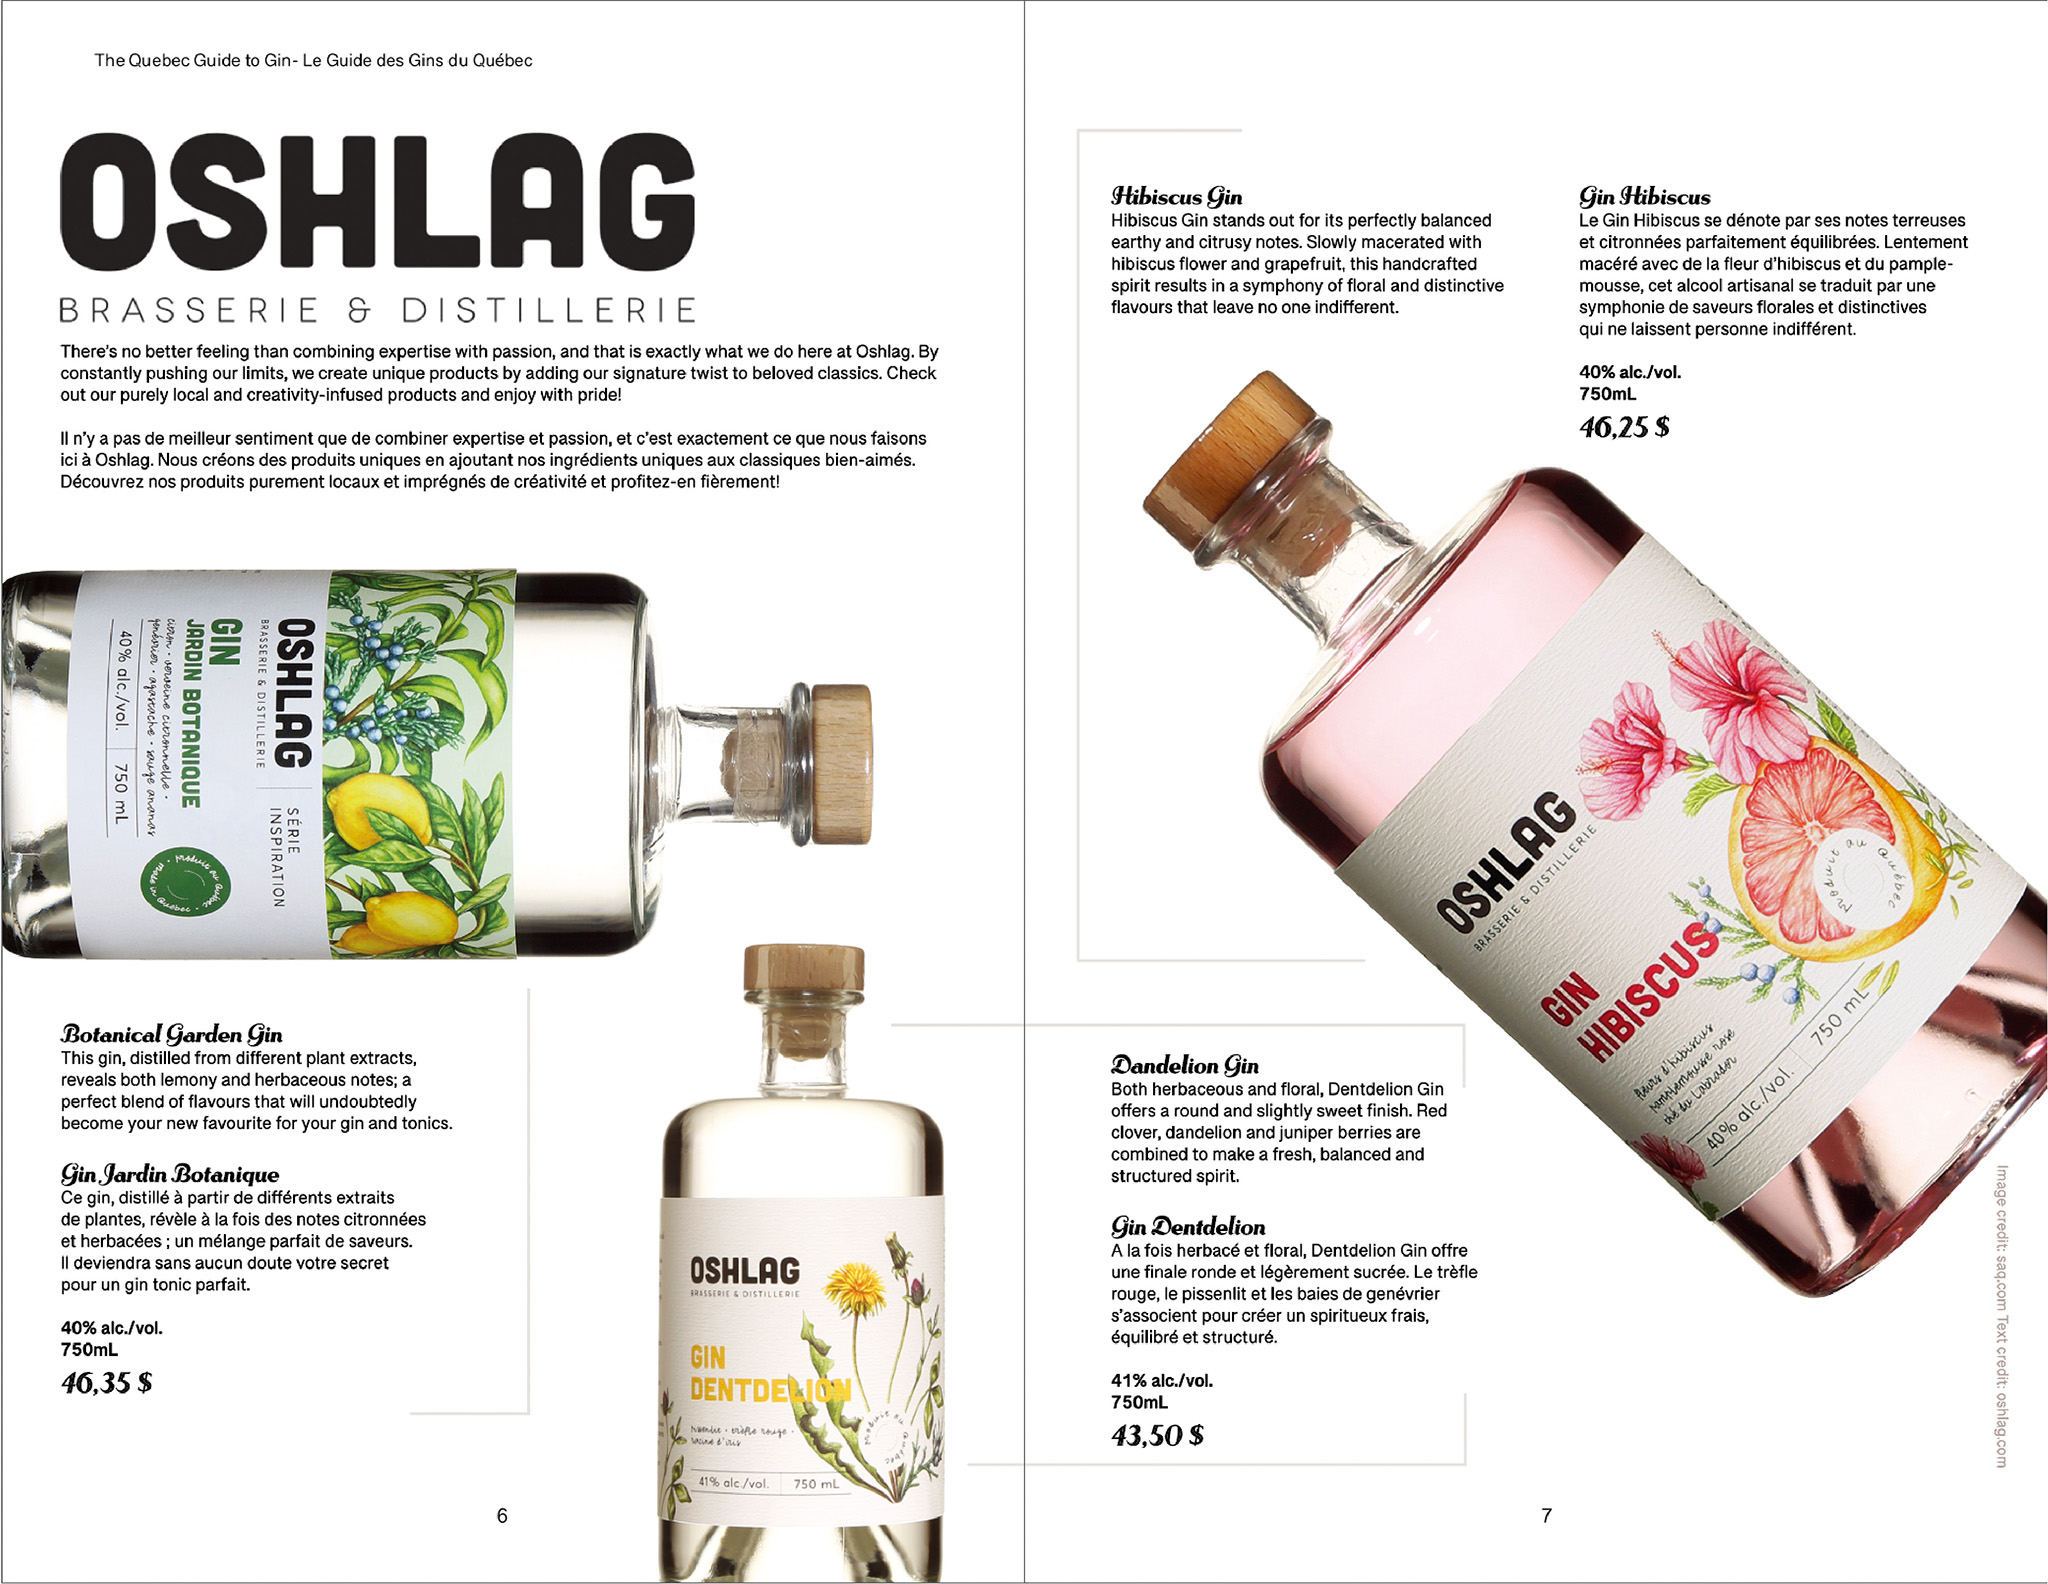 Catalog layout of two pages featuring Oshlag Gin bottles, the logo and text about the company and flavors of gin displayed.